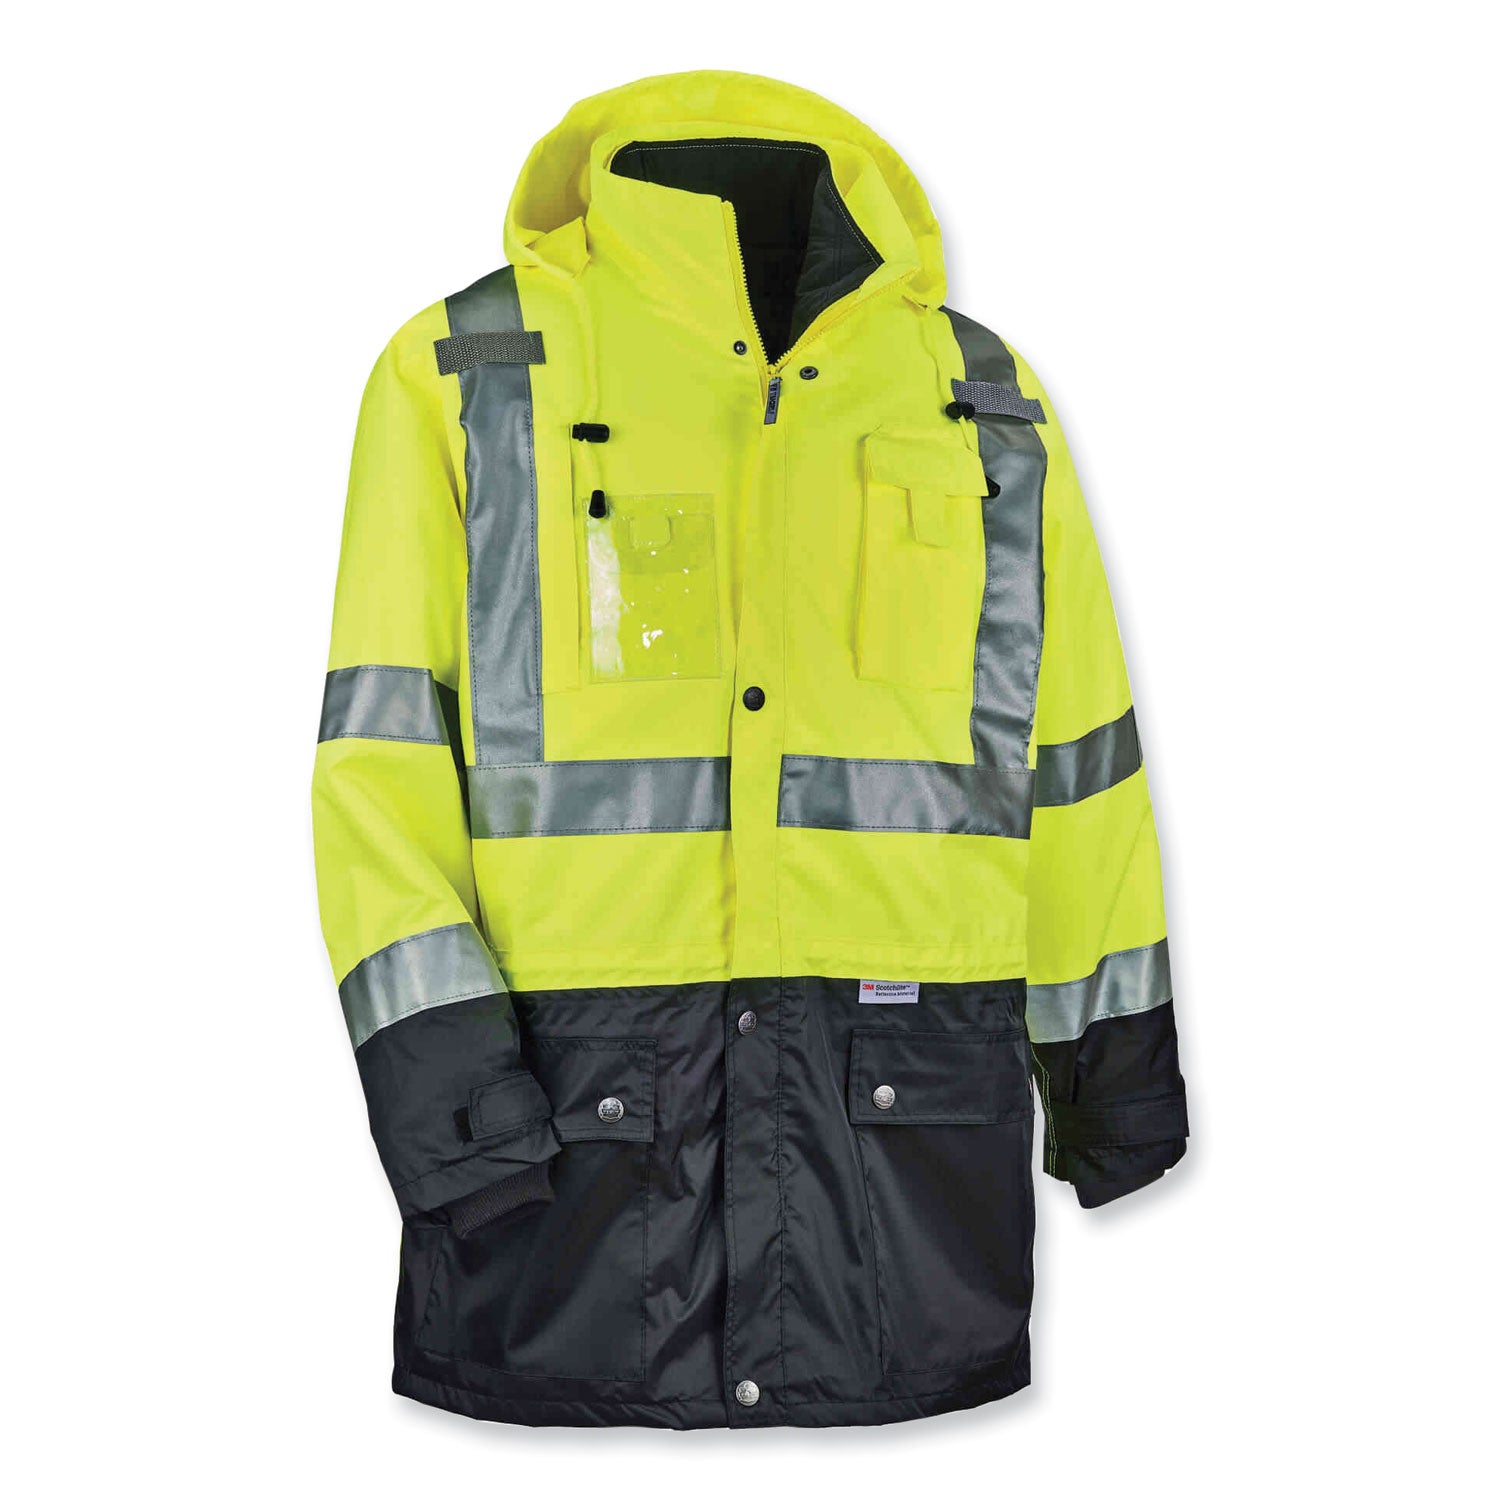 glowear-8388-class-3-2-hi-vis-thermal-jacket-kit-4x-large-lime-ships-in-1-3-business-days_ego25538 - 1